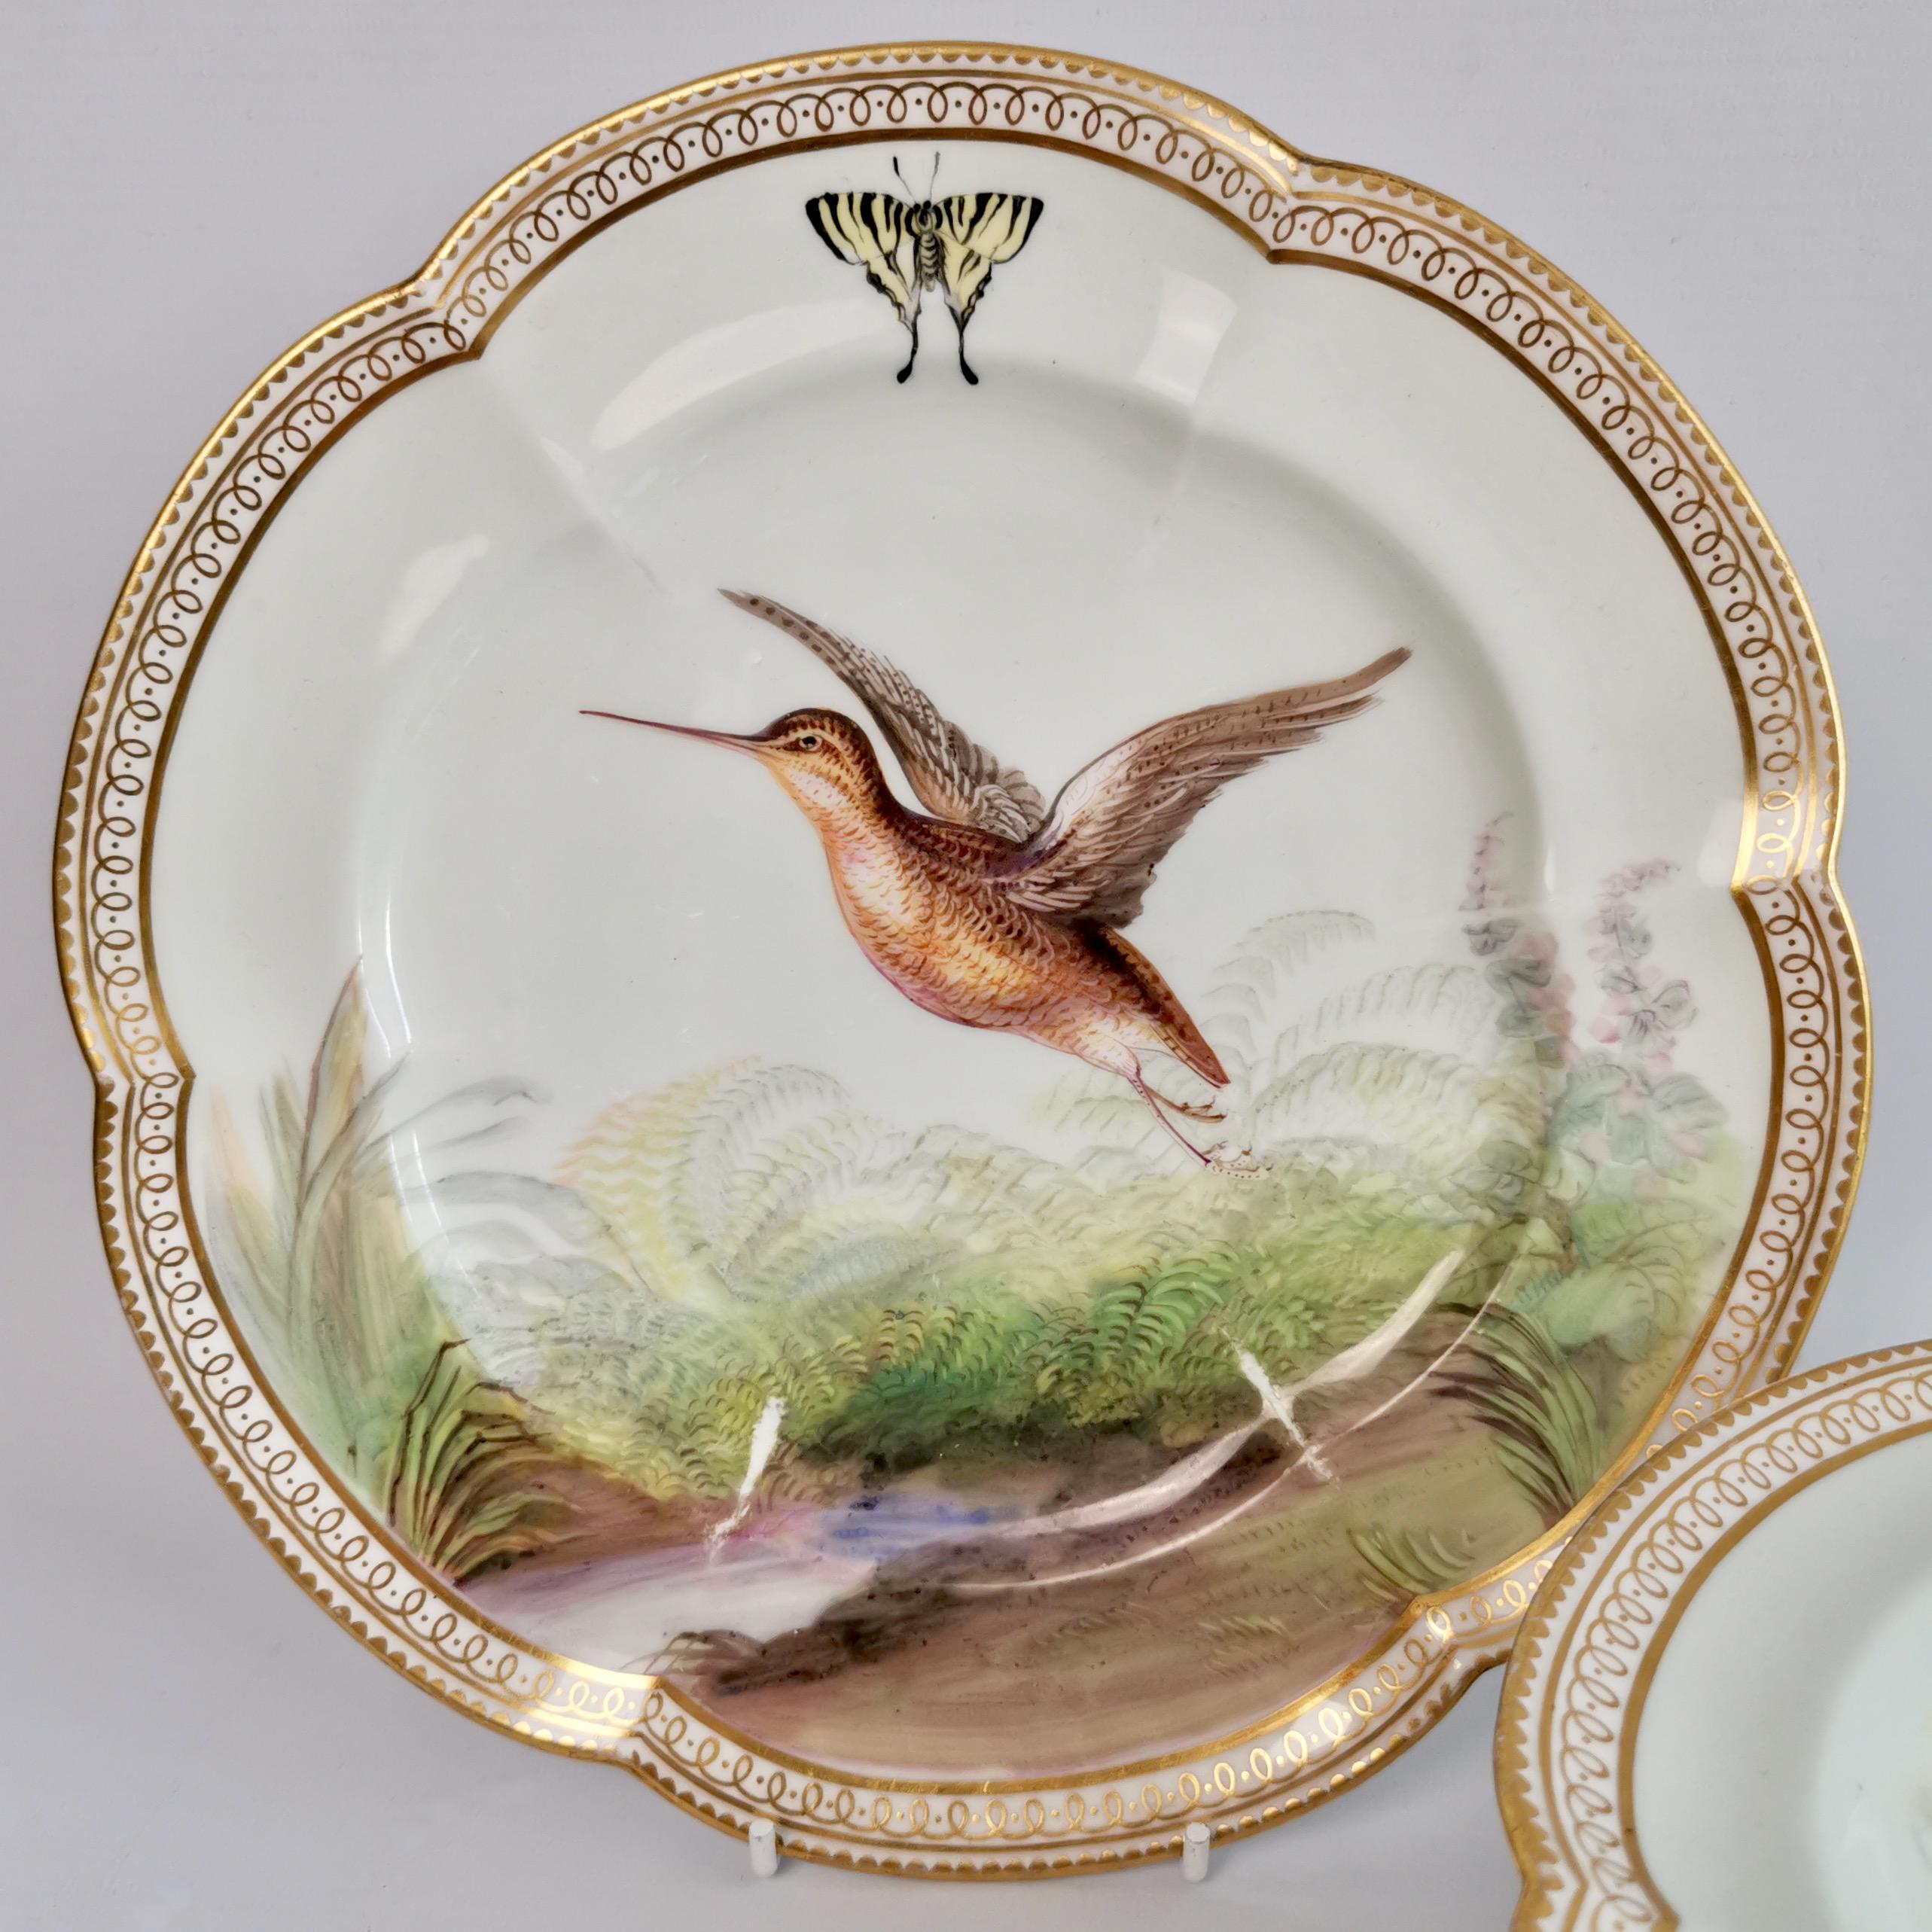 Hand-Painted Coalport Porcelain Comport and Plate, Birds by John Randall, Victorian 1865-1870